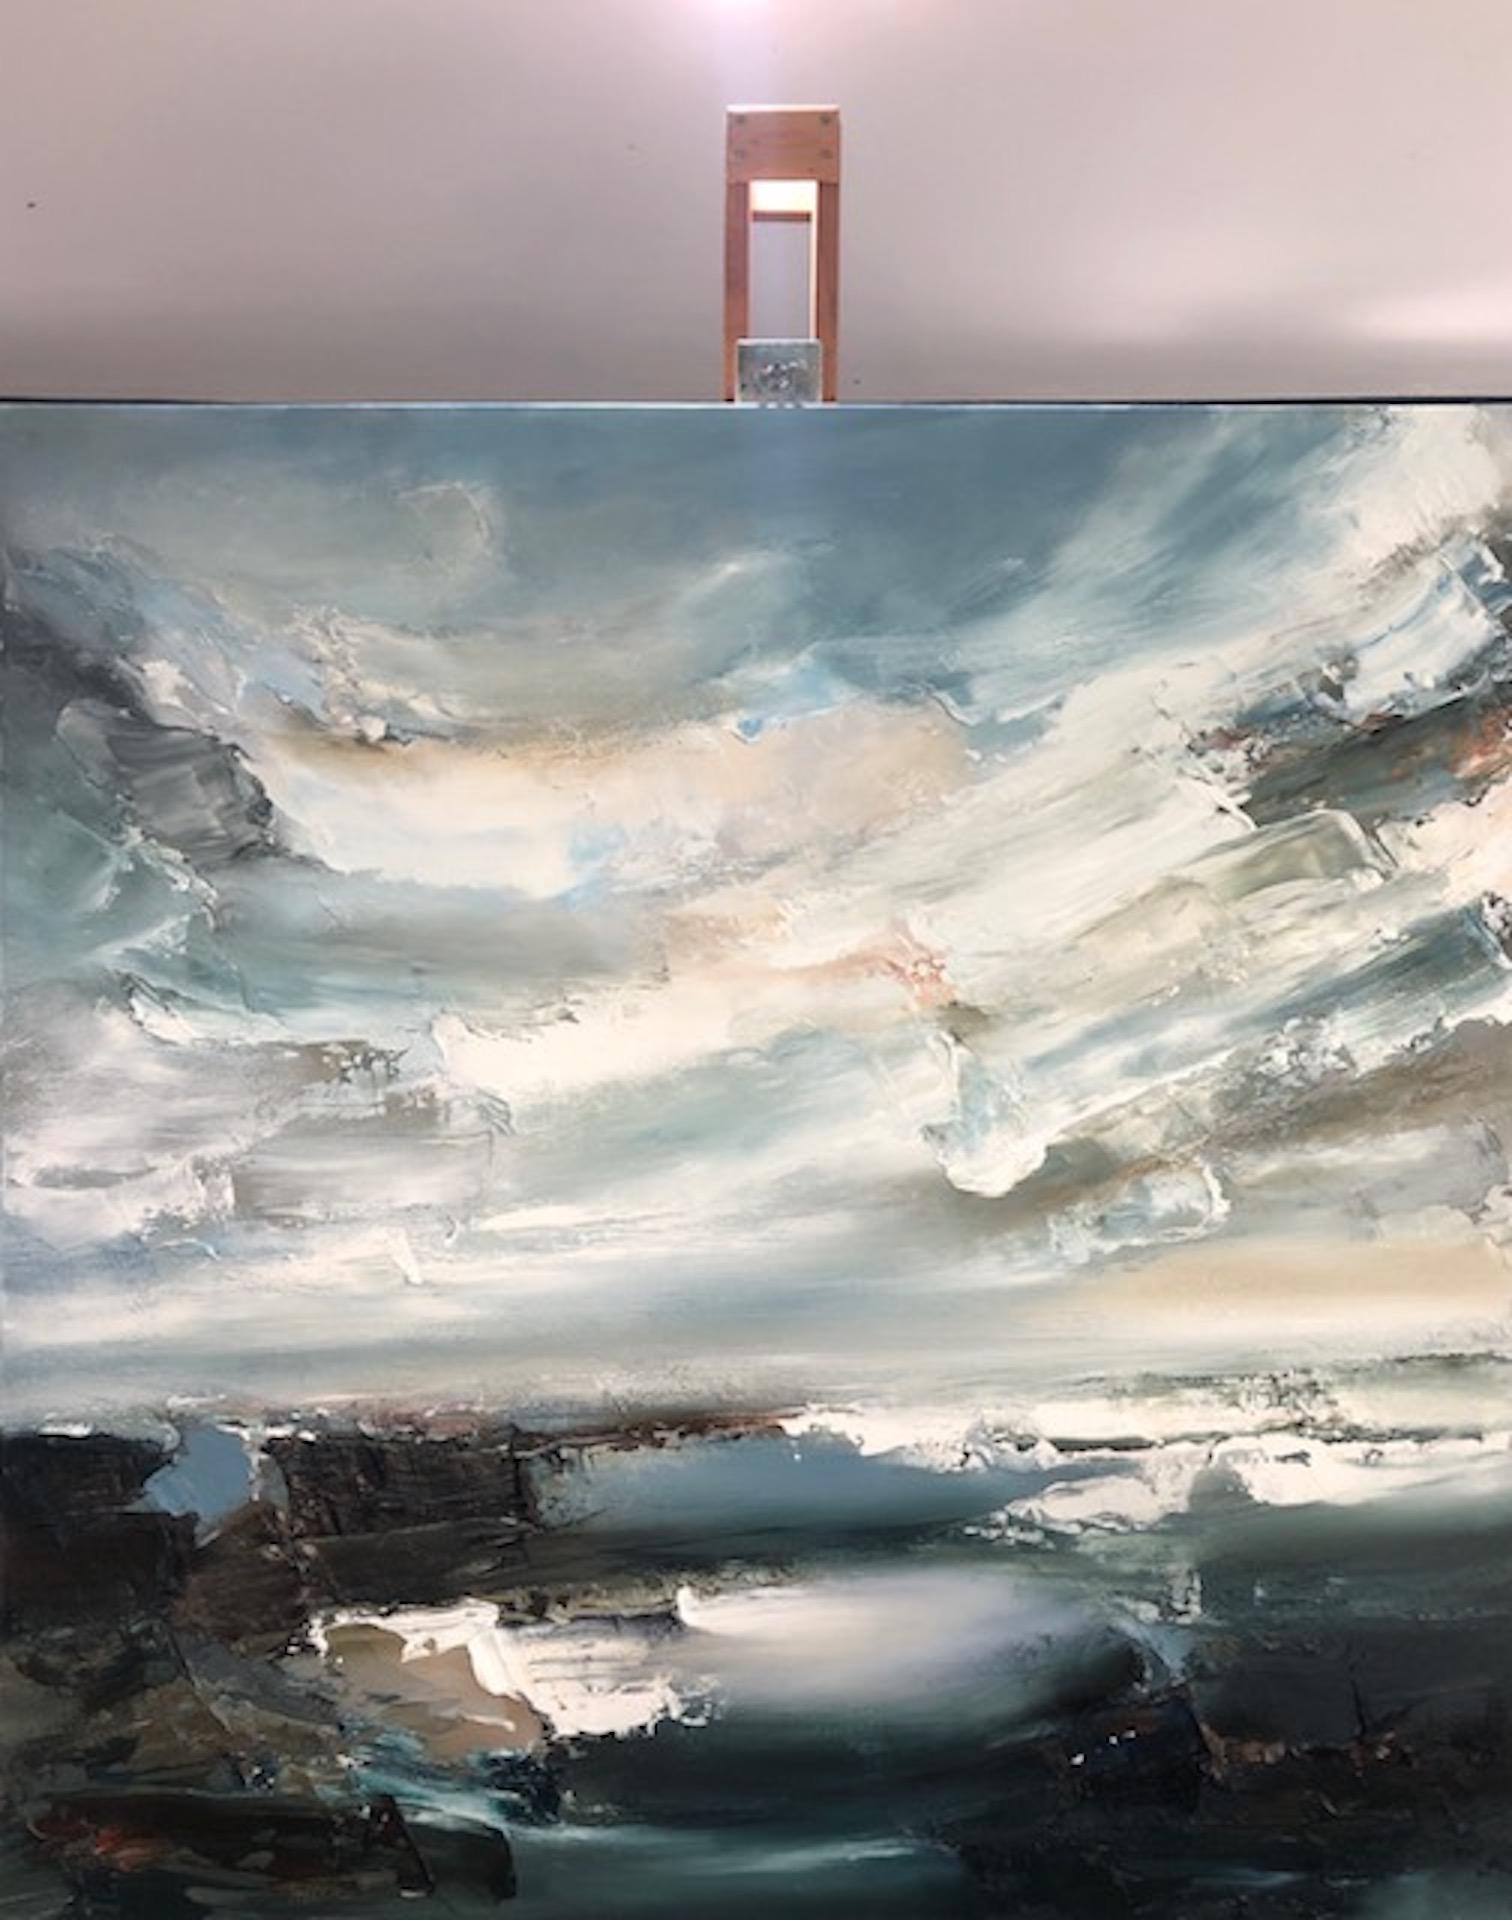 Helen Howells
Distant Stillness
Original Oil Painting on Canvas
Oil Paint on Canvas
Canvas size: H 91cm x W 91cm x D 3.5cm
Sold – Unframed
(Please note that in situ images are purely an indication of how a piece may look)

Distant Stillness is an